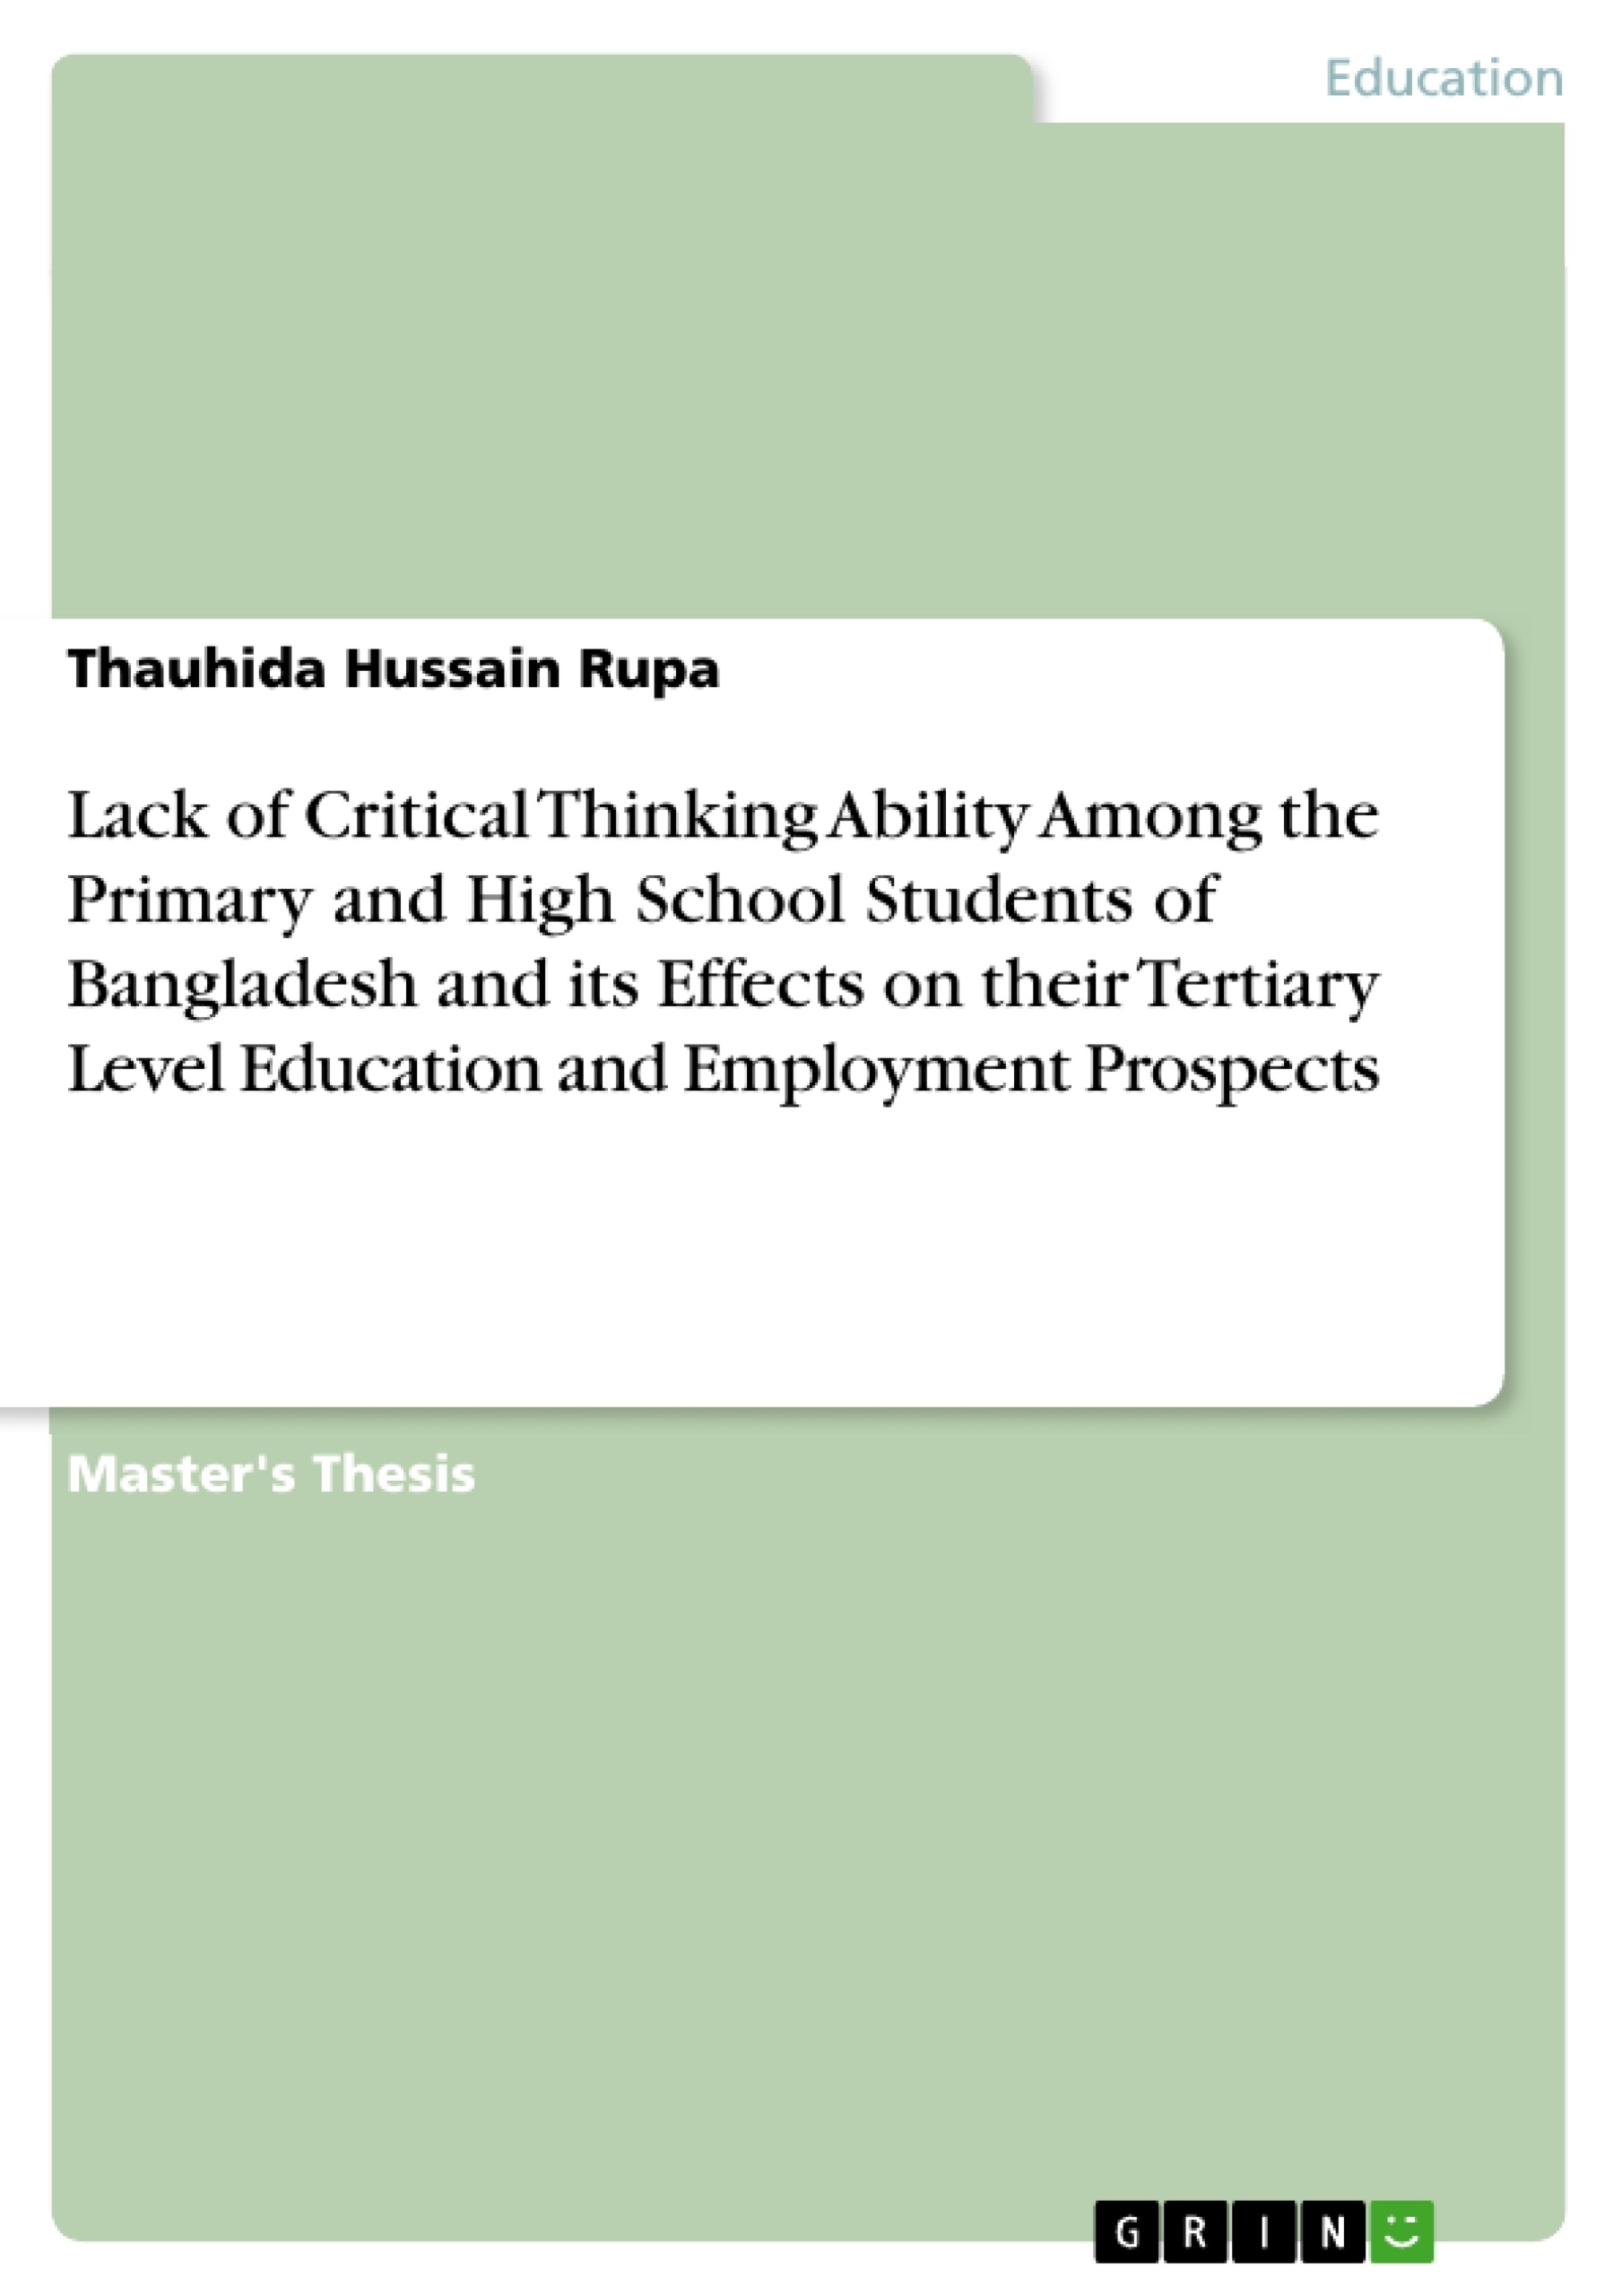 Title: Lack of Critical Thinking Ability Among the Primary and High School Students of Bangladesh and its Effects on their Tertiary Level Education and Employment Prospects